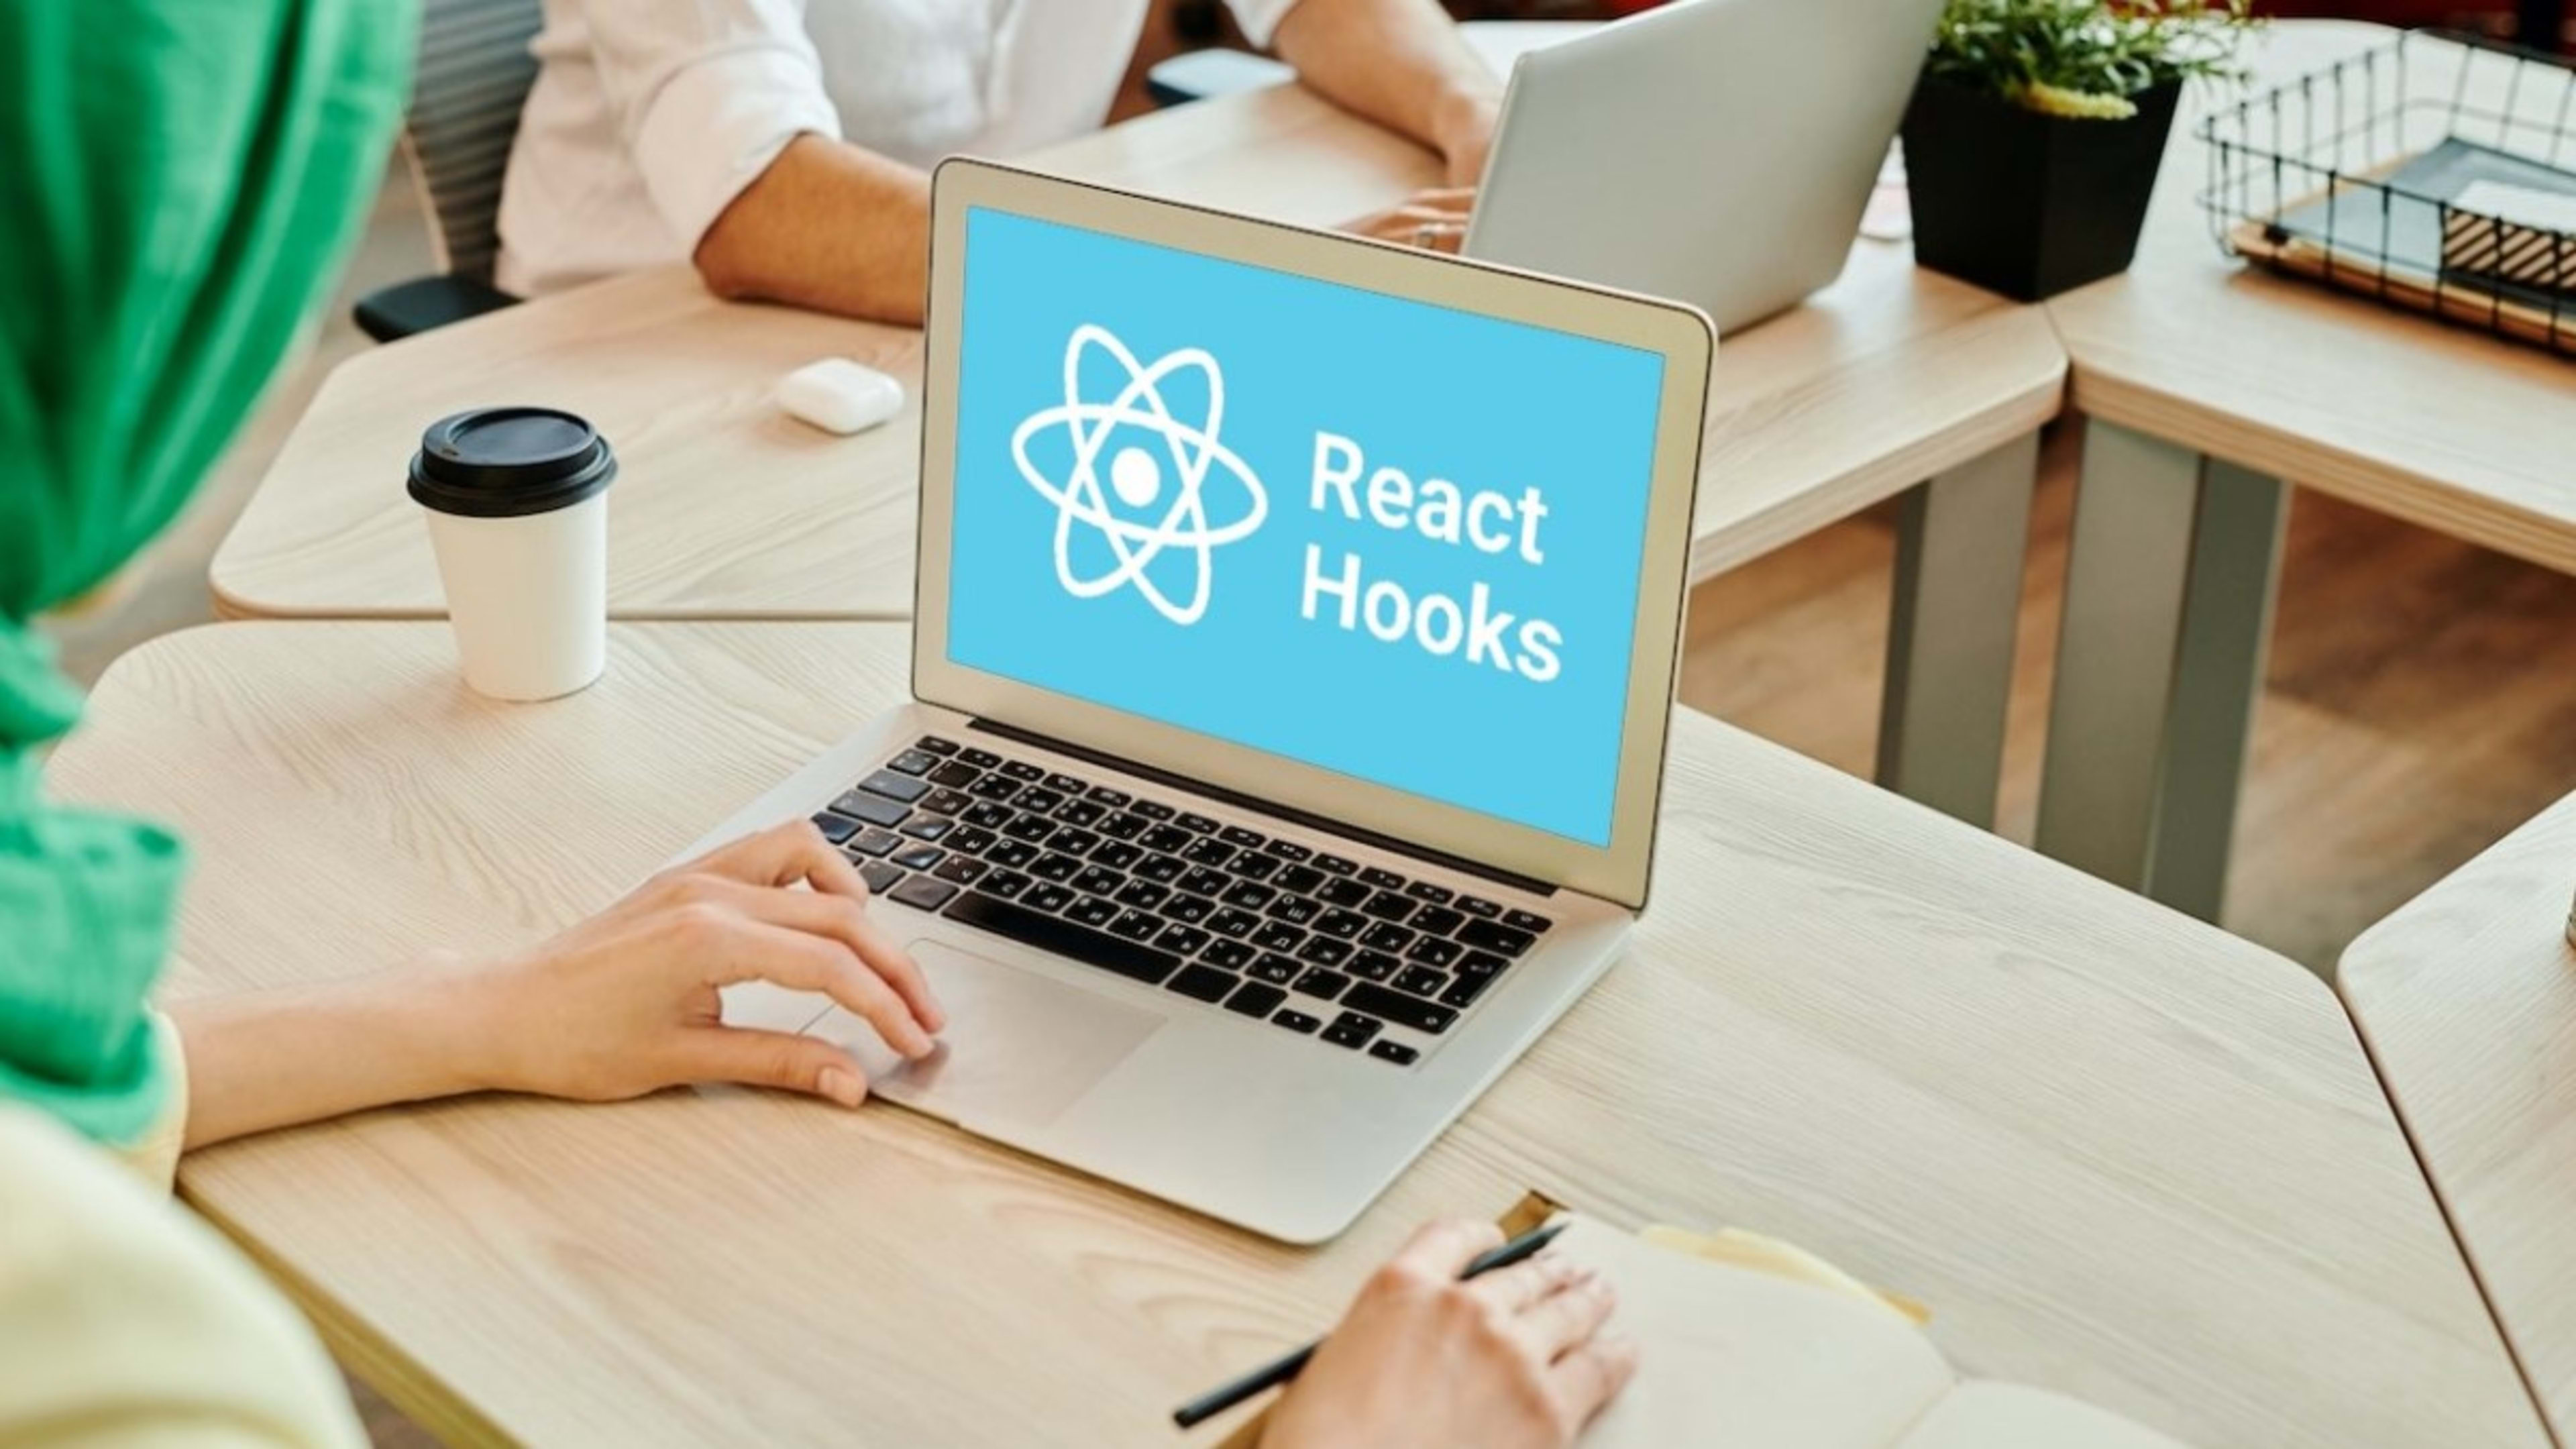 The Power of Hooks in React: Streamlined Dynamic Applications